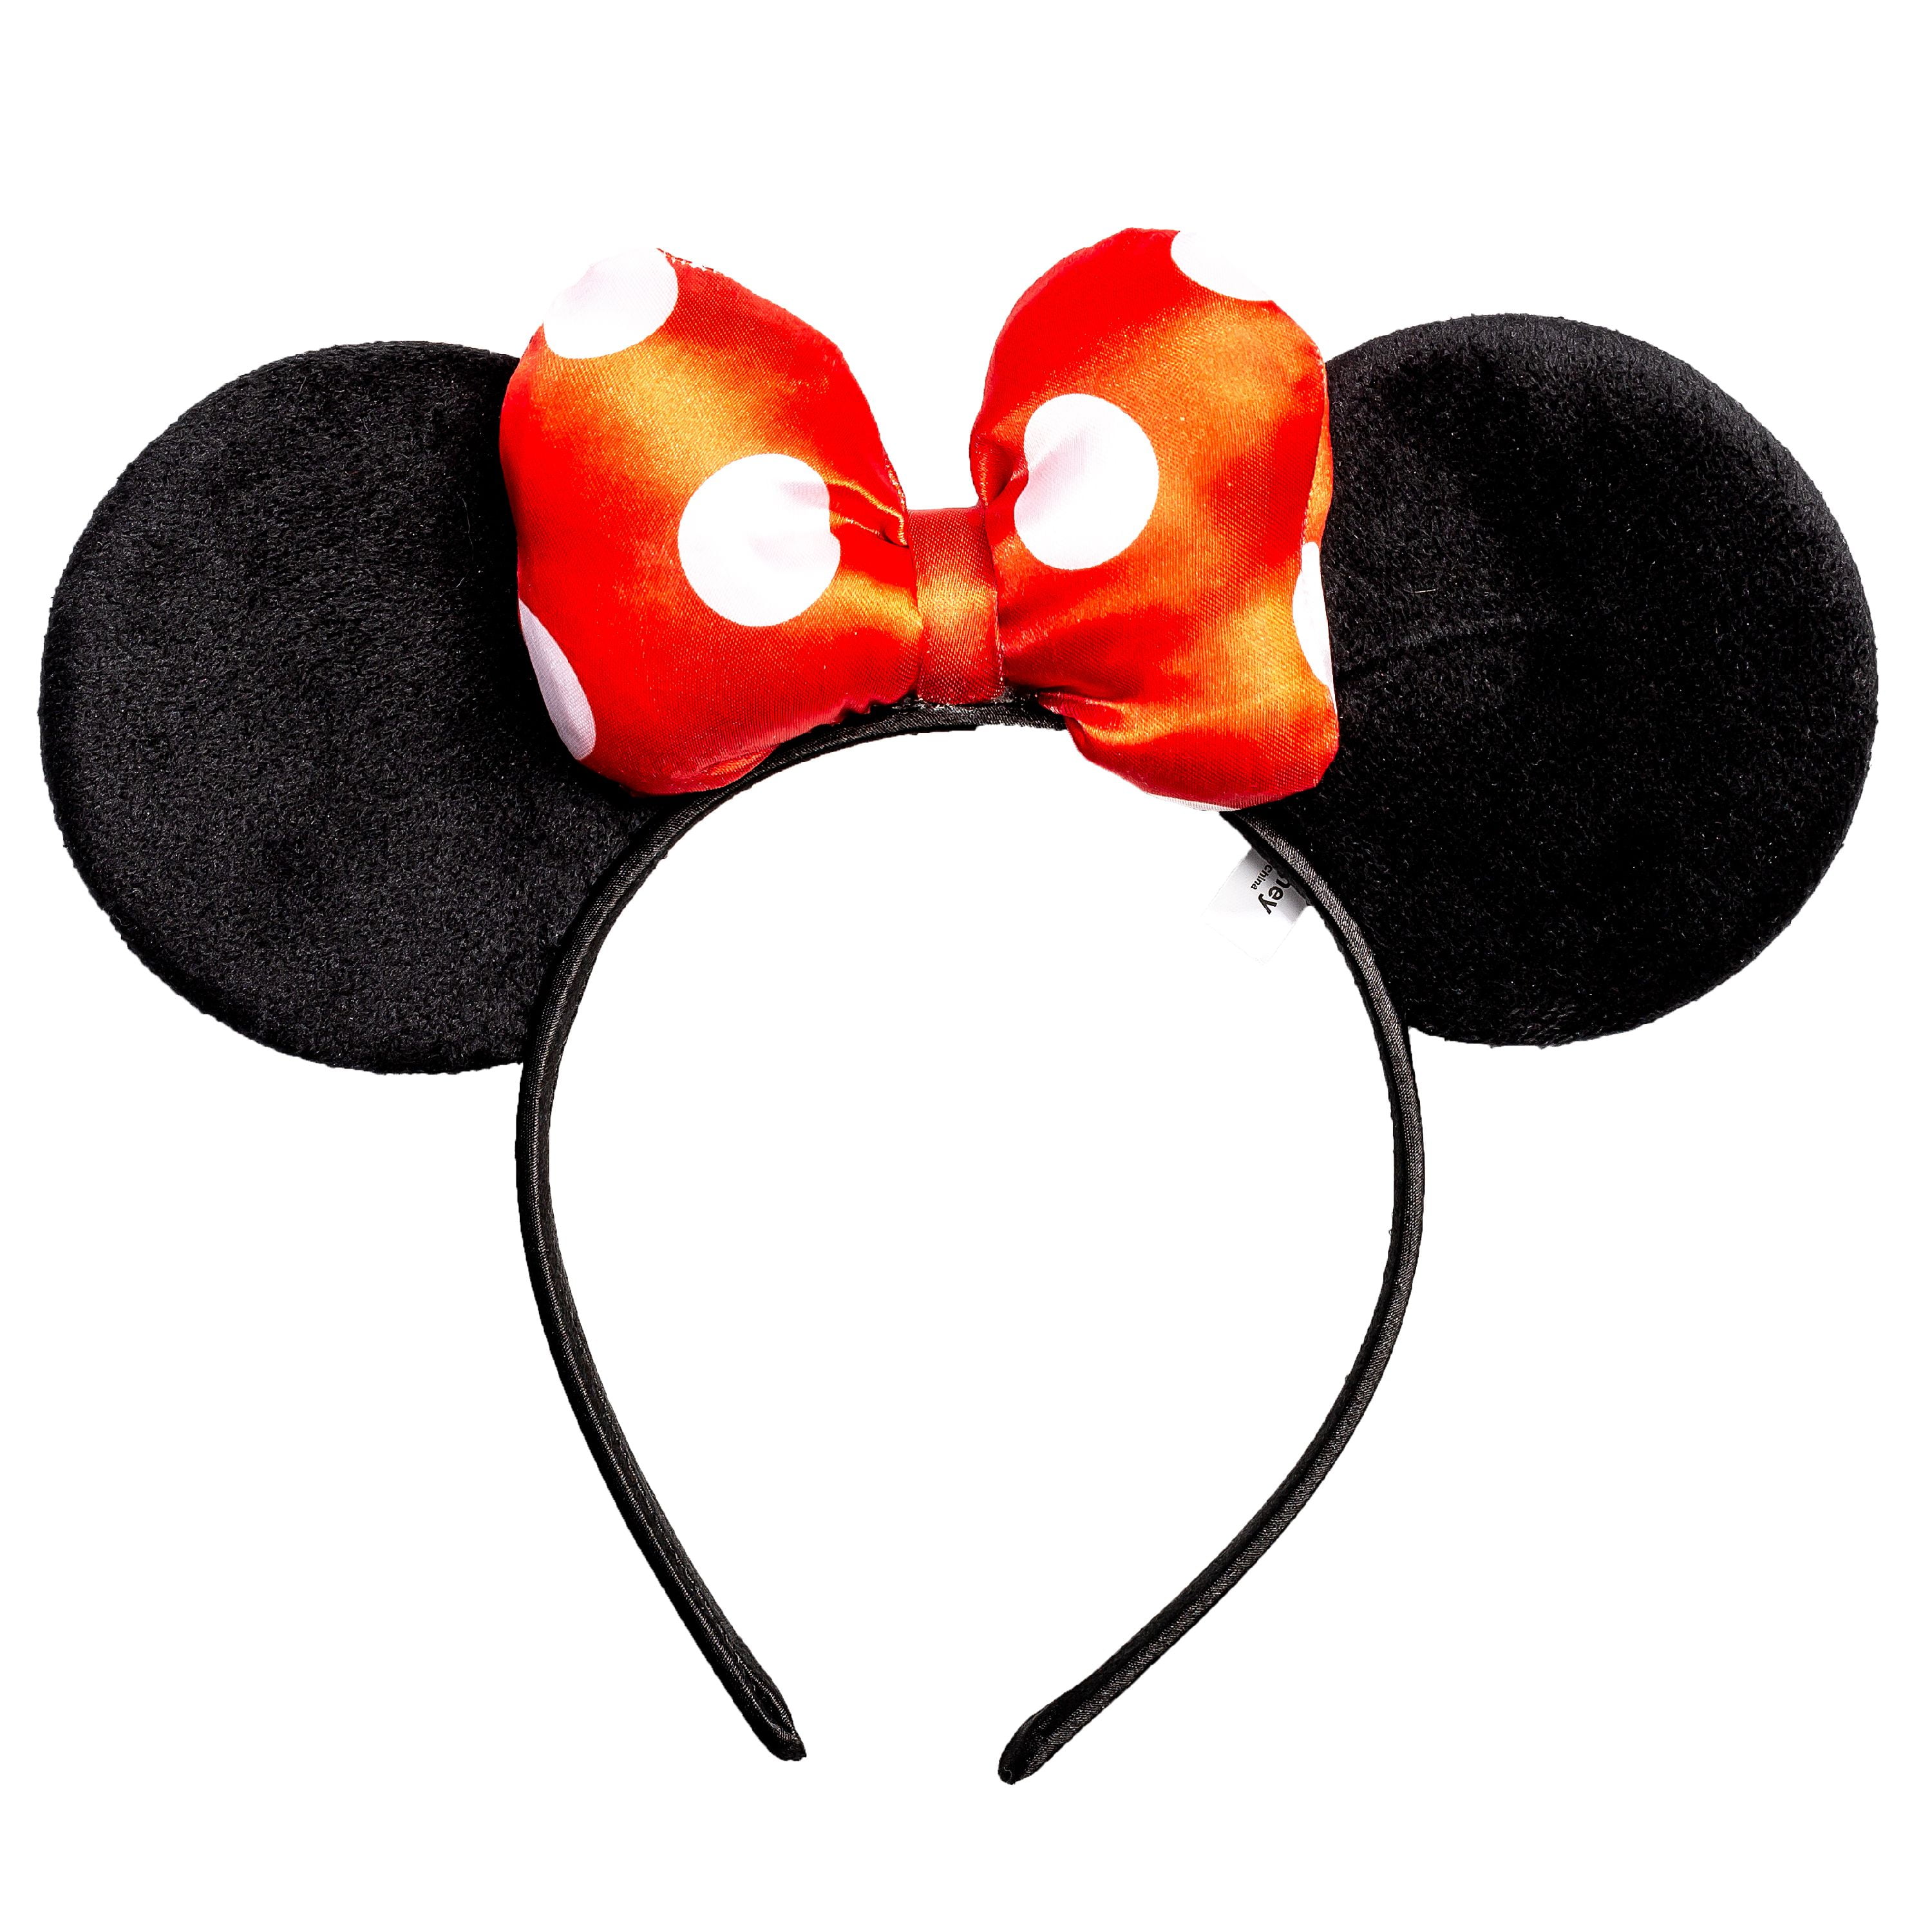 Minnie Mouse Ears Sequin Bling Bling Ribbon Bows Colorful Headbands Wholesale